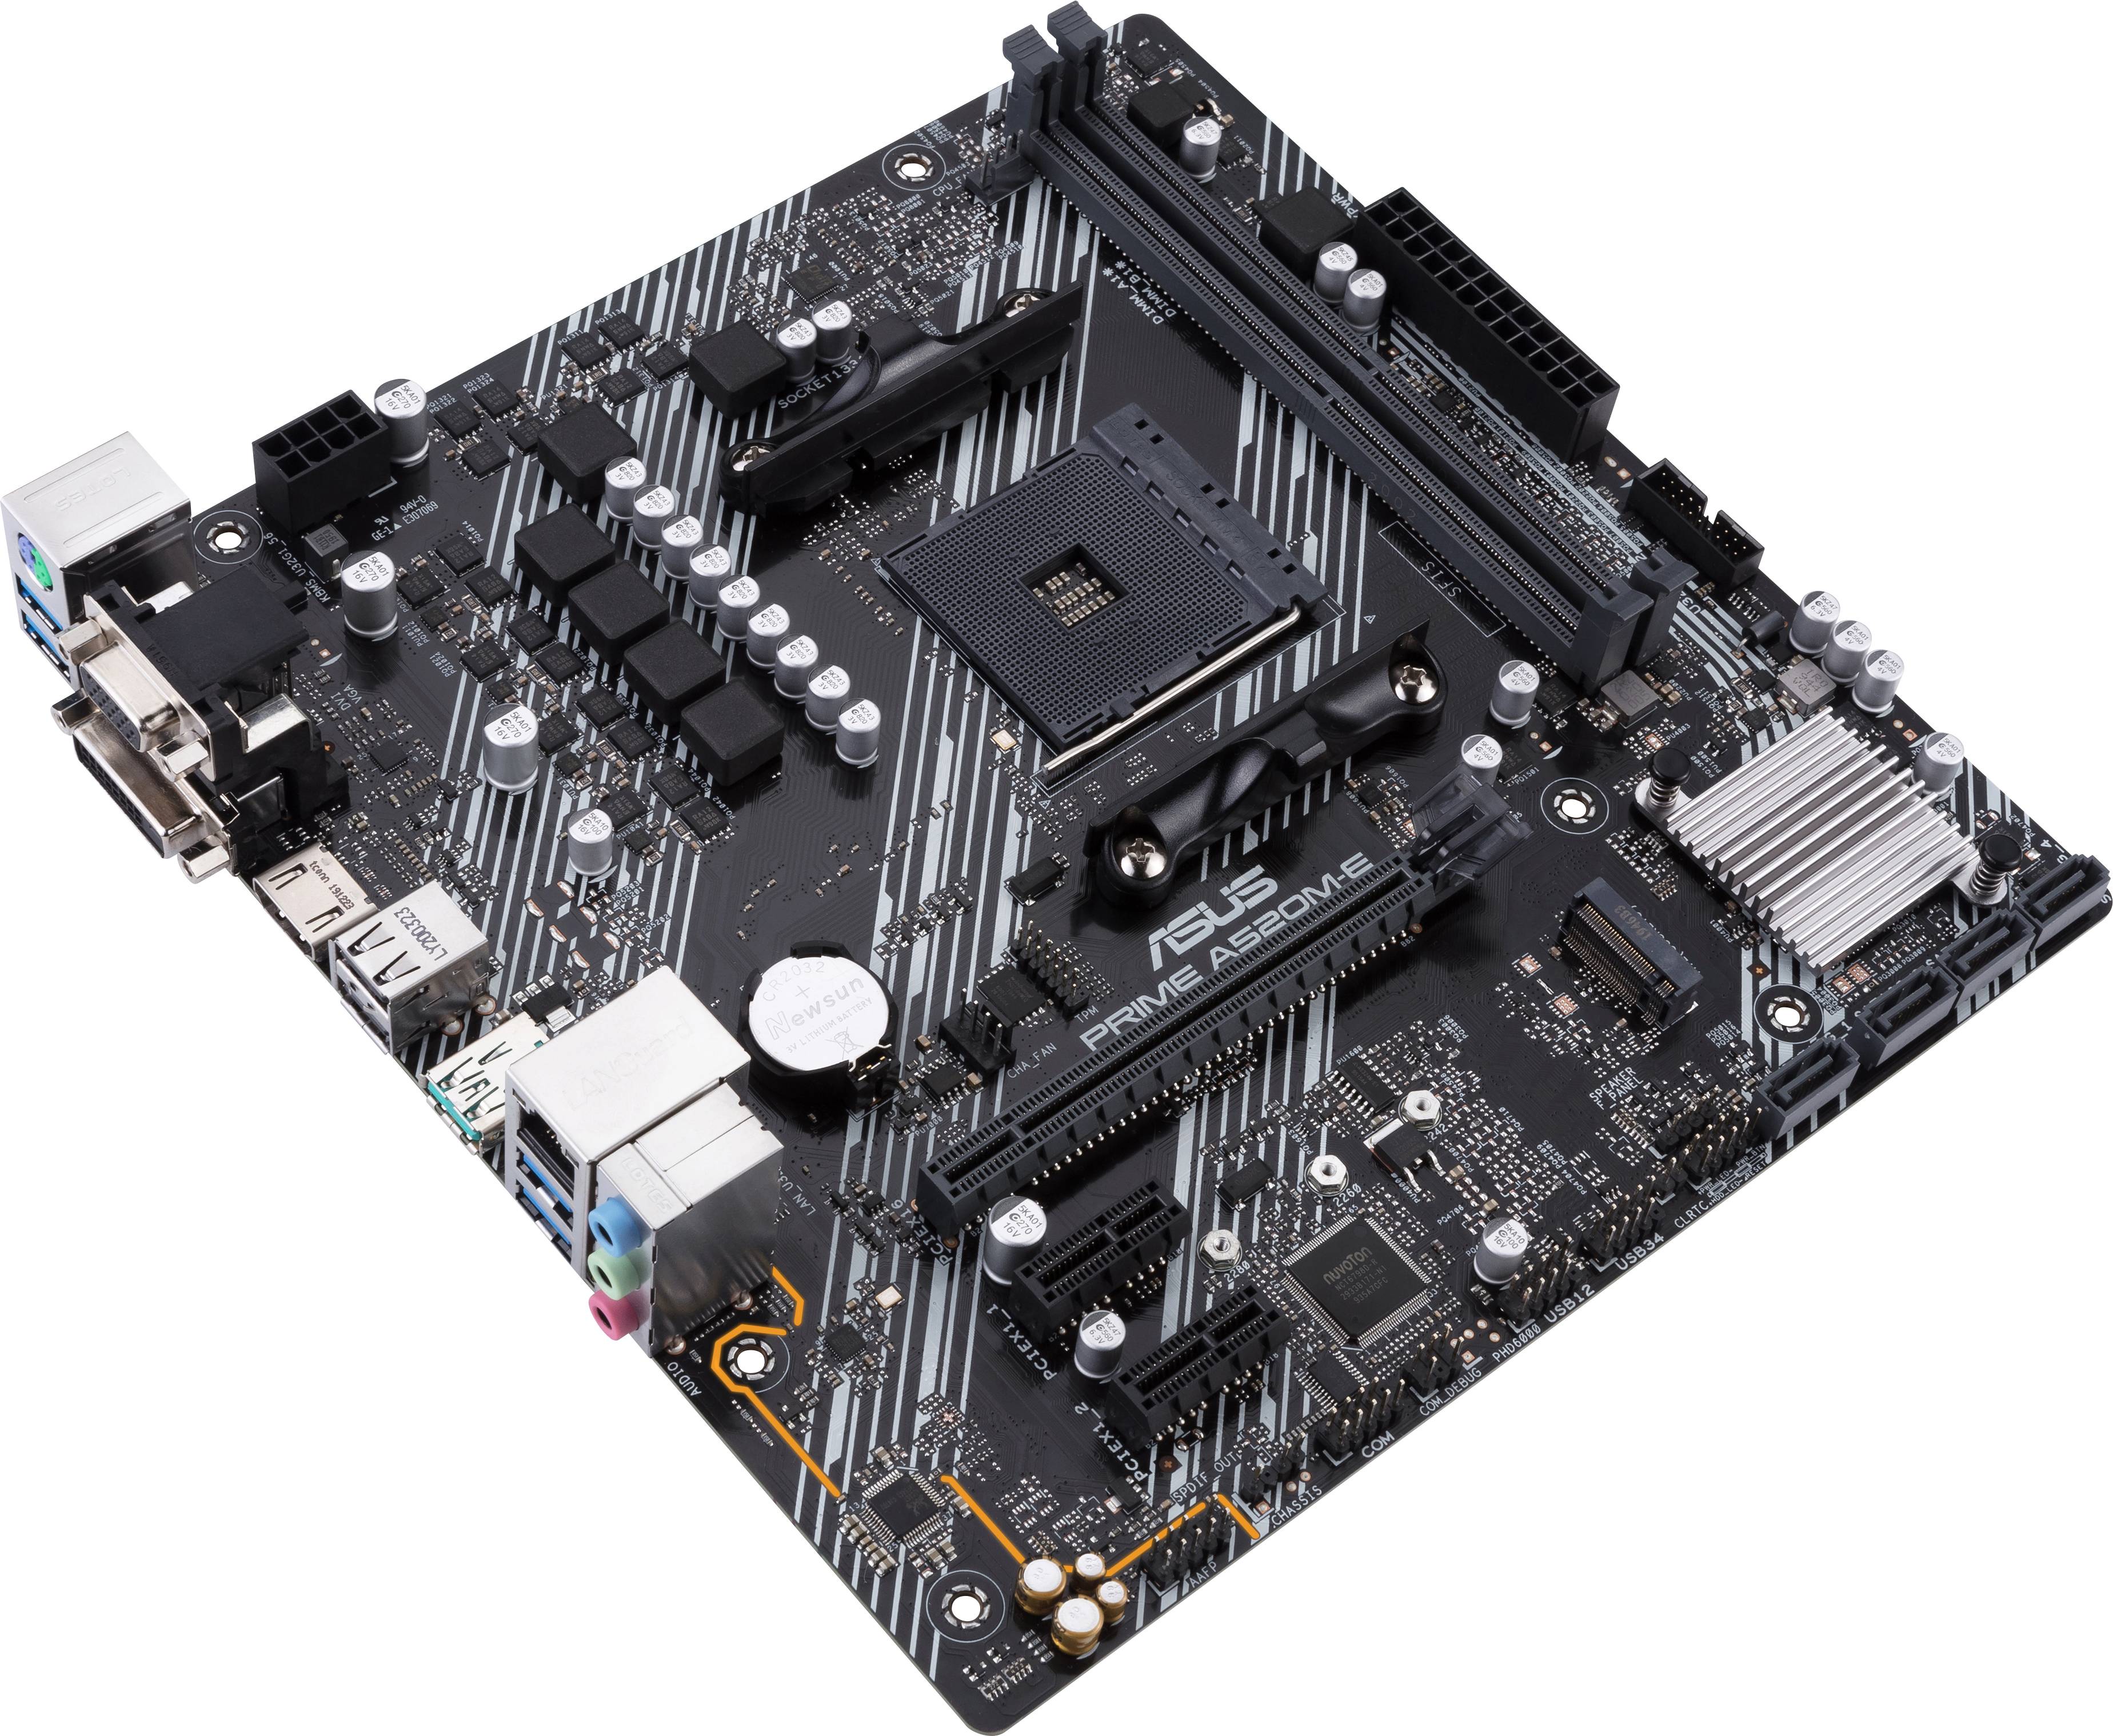 asus-prime-a520m-e-motherboard-pc-base-amd-am4-form-factor-micro-atx